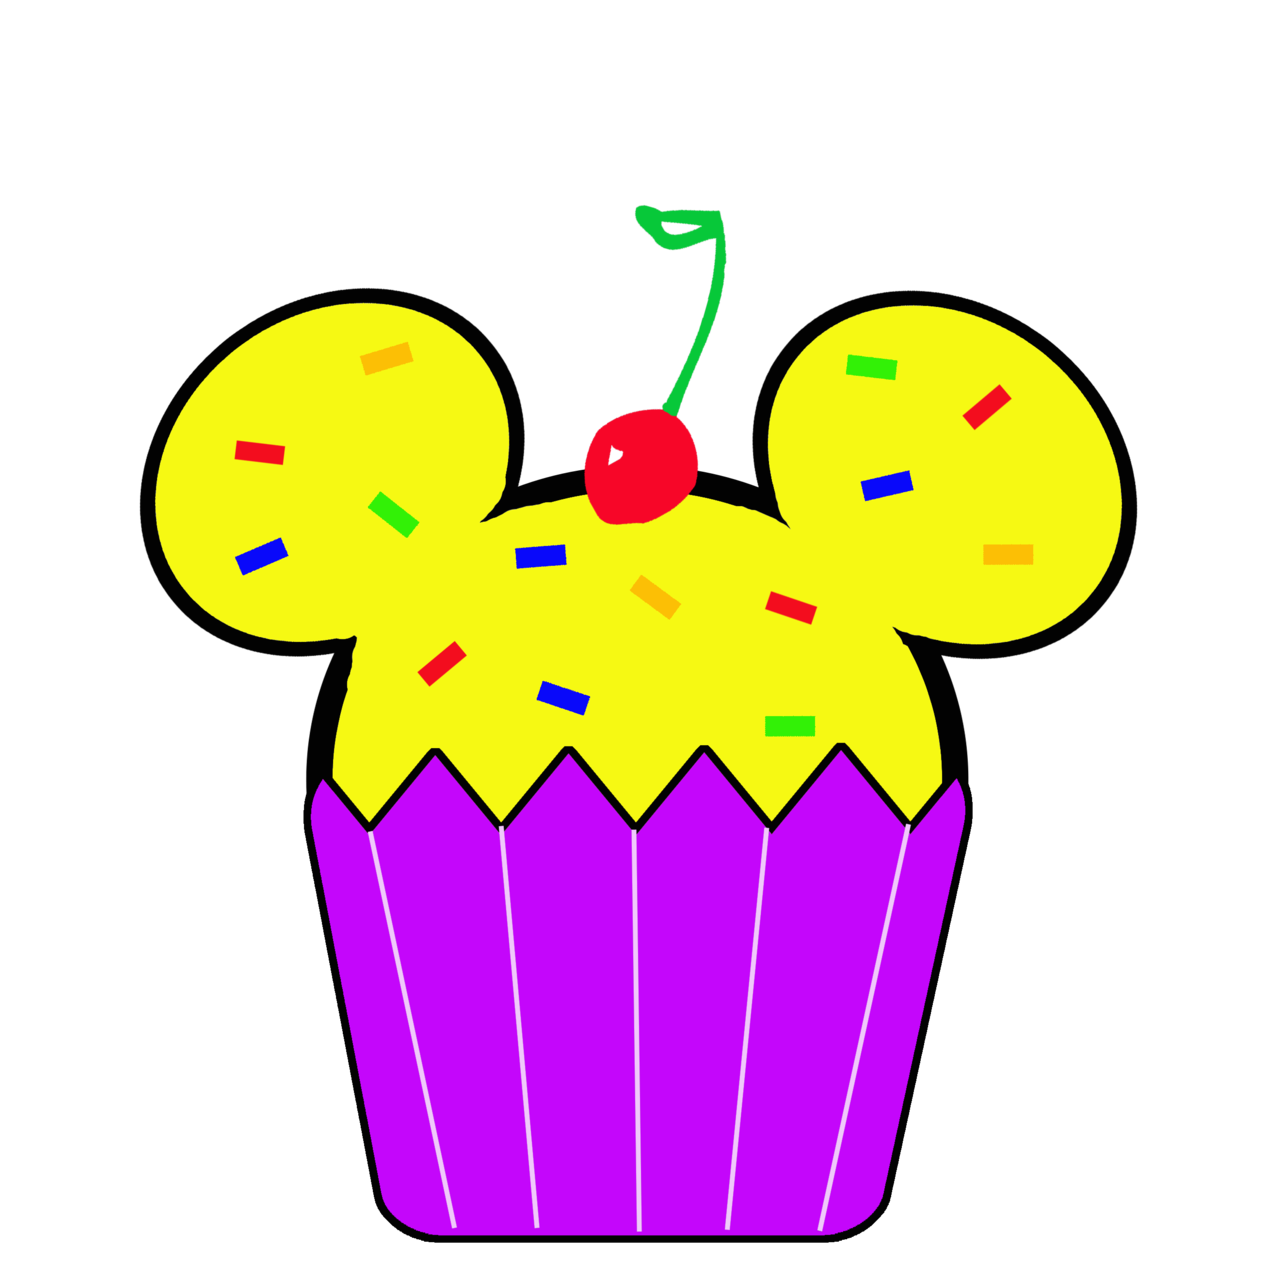 Cupcake Images Clip Art - Clipart library